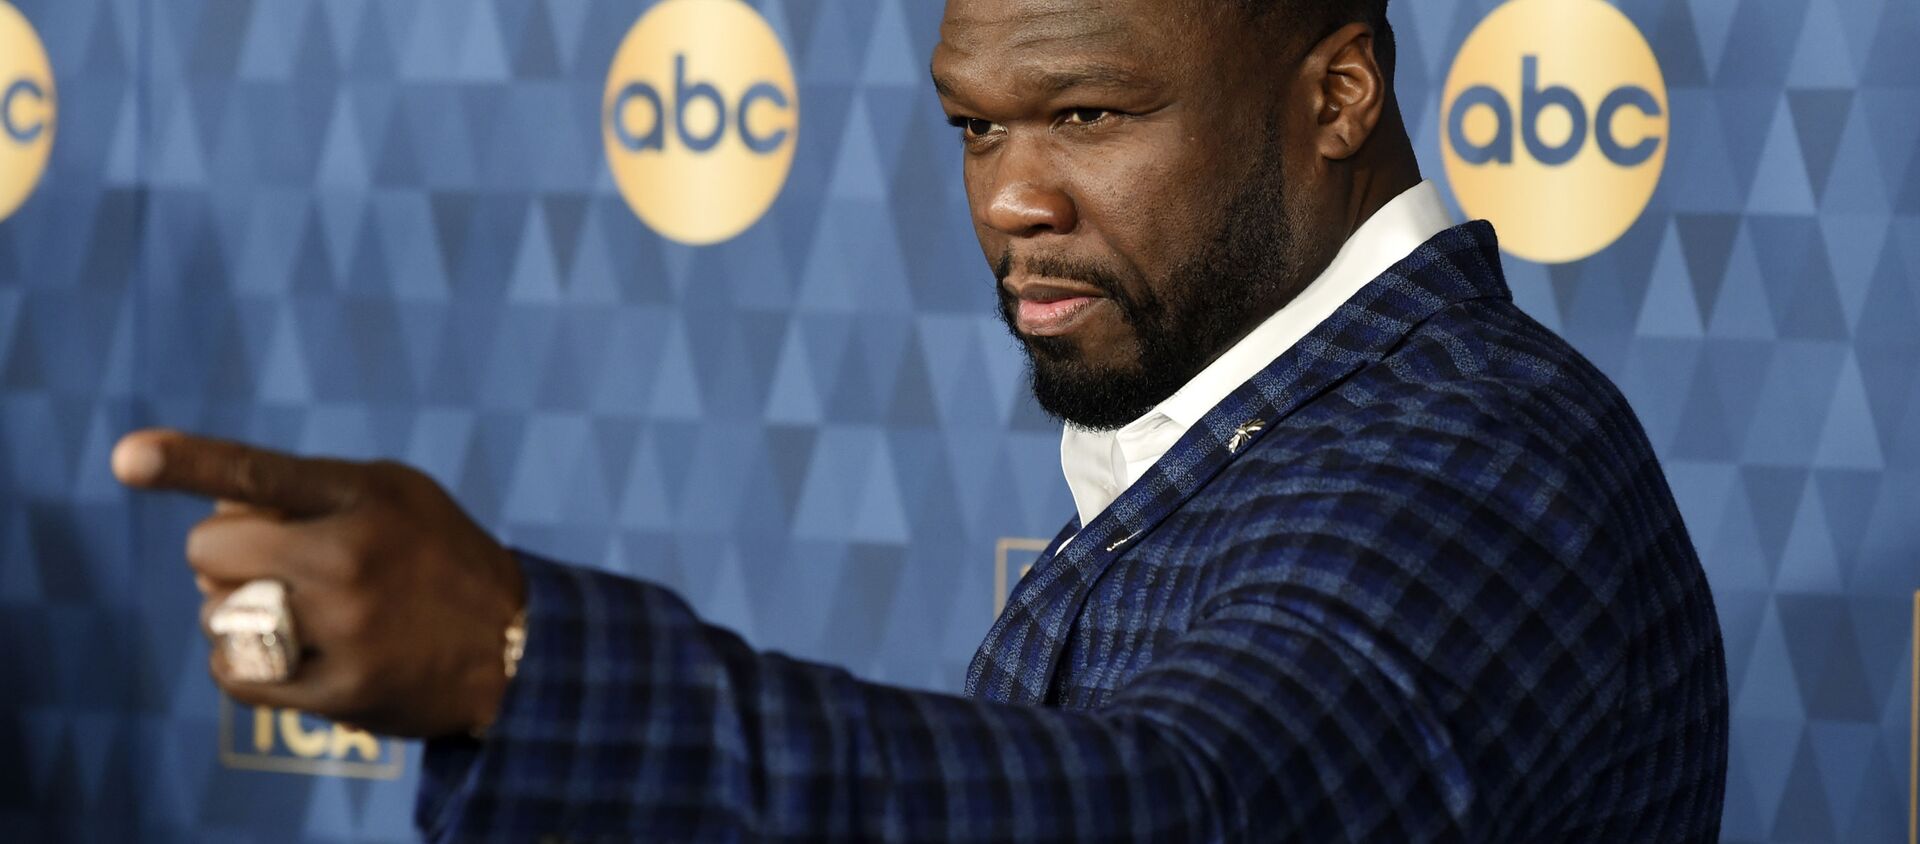 Curtis 50 Cent Jackson, a cast member in the ABC television series For Life, poses at the 2020 ABC Television Critics Association Winter Press Tour, Wednesday, Jan. 8, 2020, in Pasadena, Calif. - Sputnik International, 1920, 20.10.2020